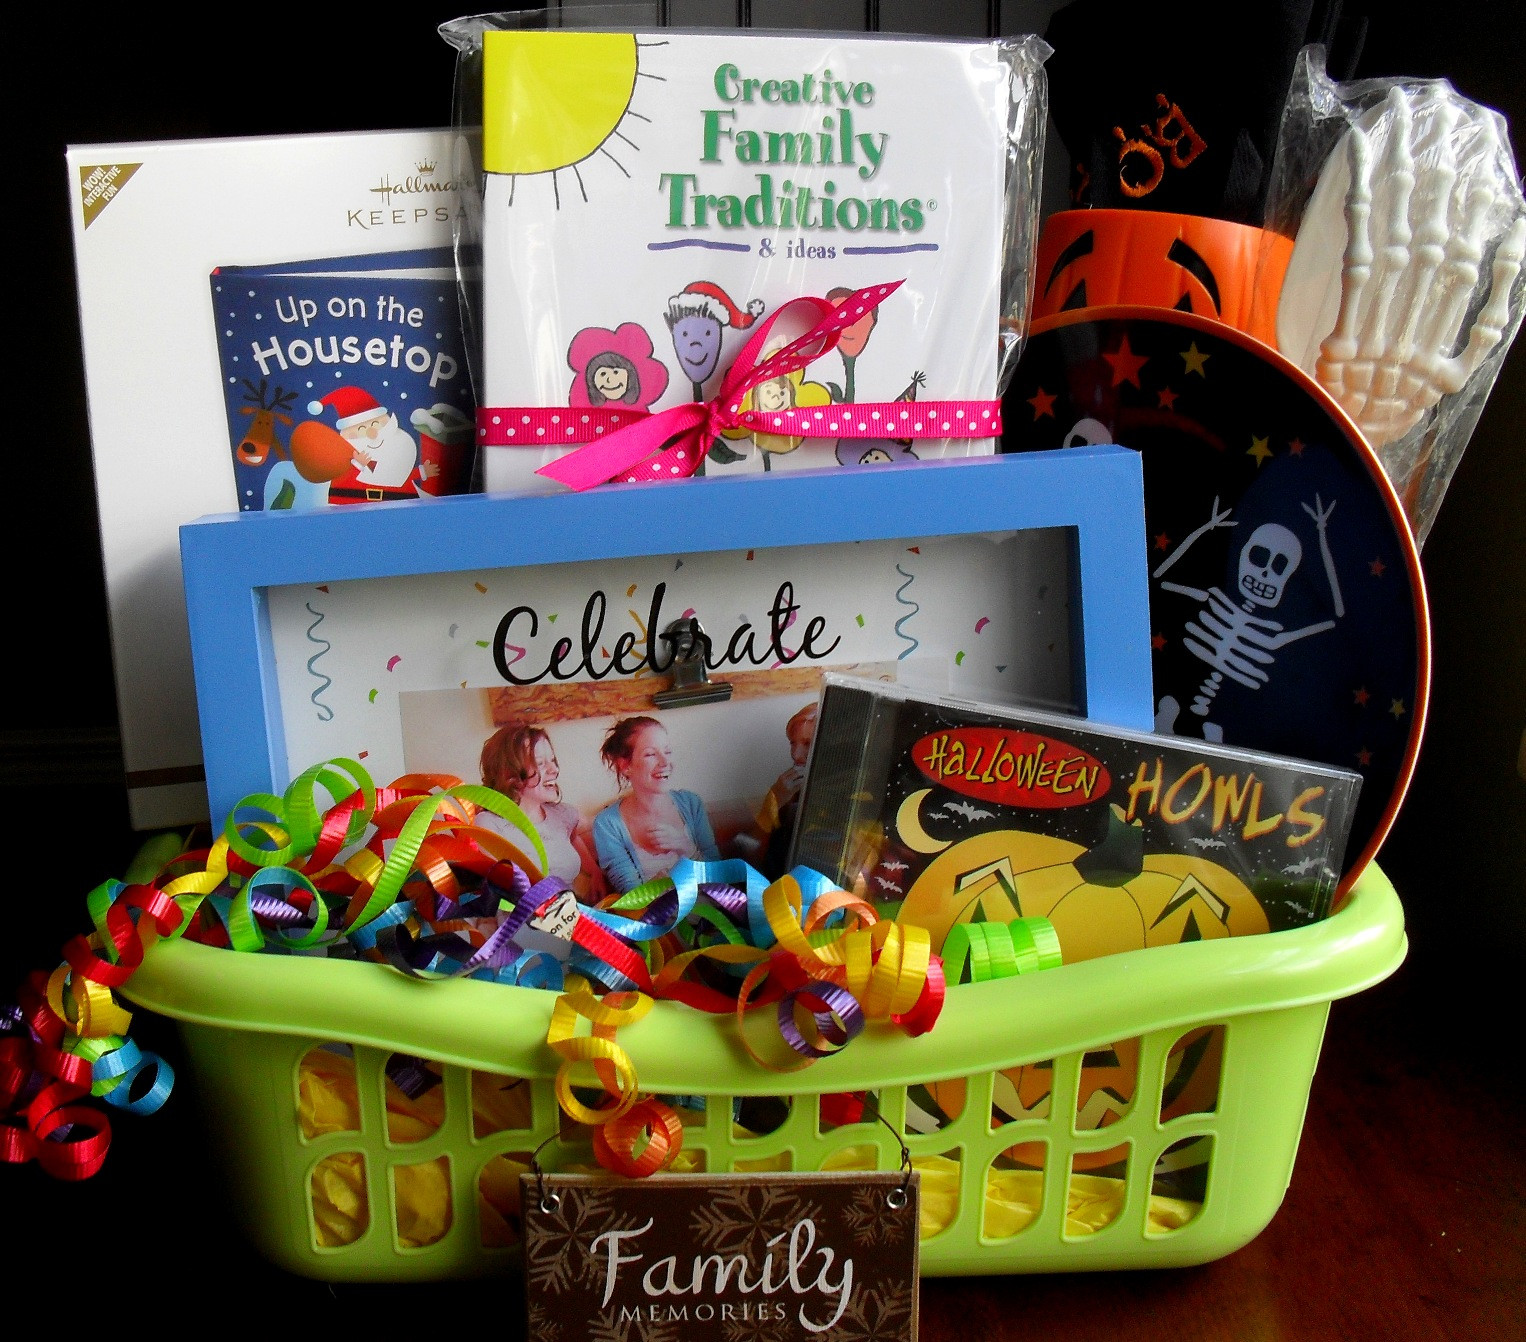 Gifts For Families With Kids
 “Gifting” FAMILY MEMORIES The Seasonal Home